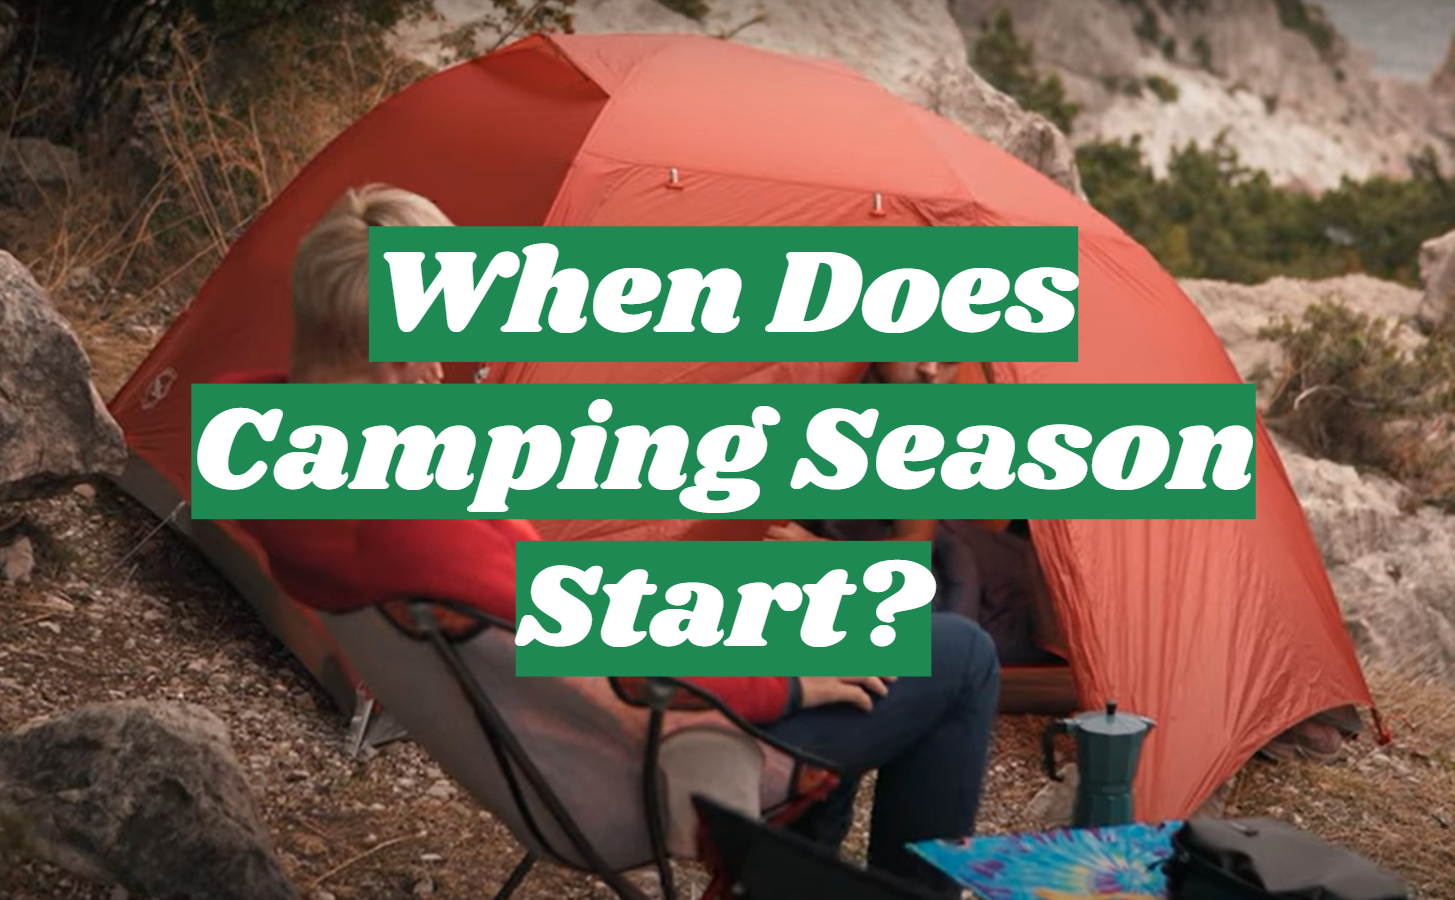 When Does Camping Season Start?